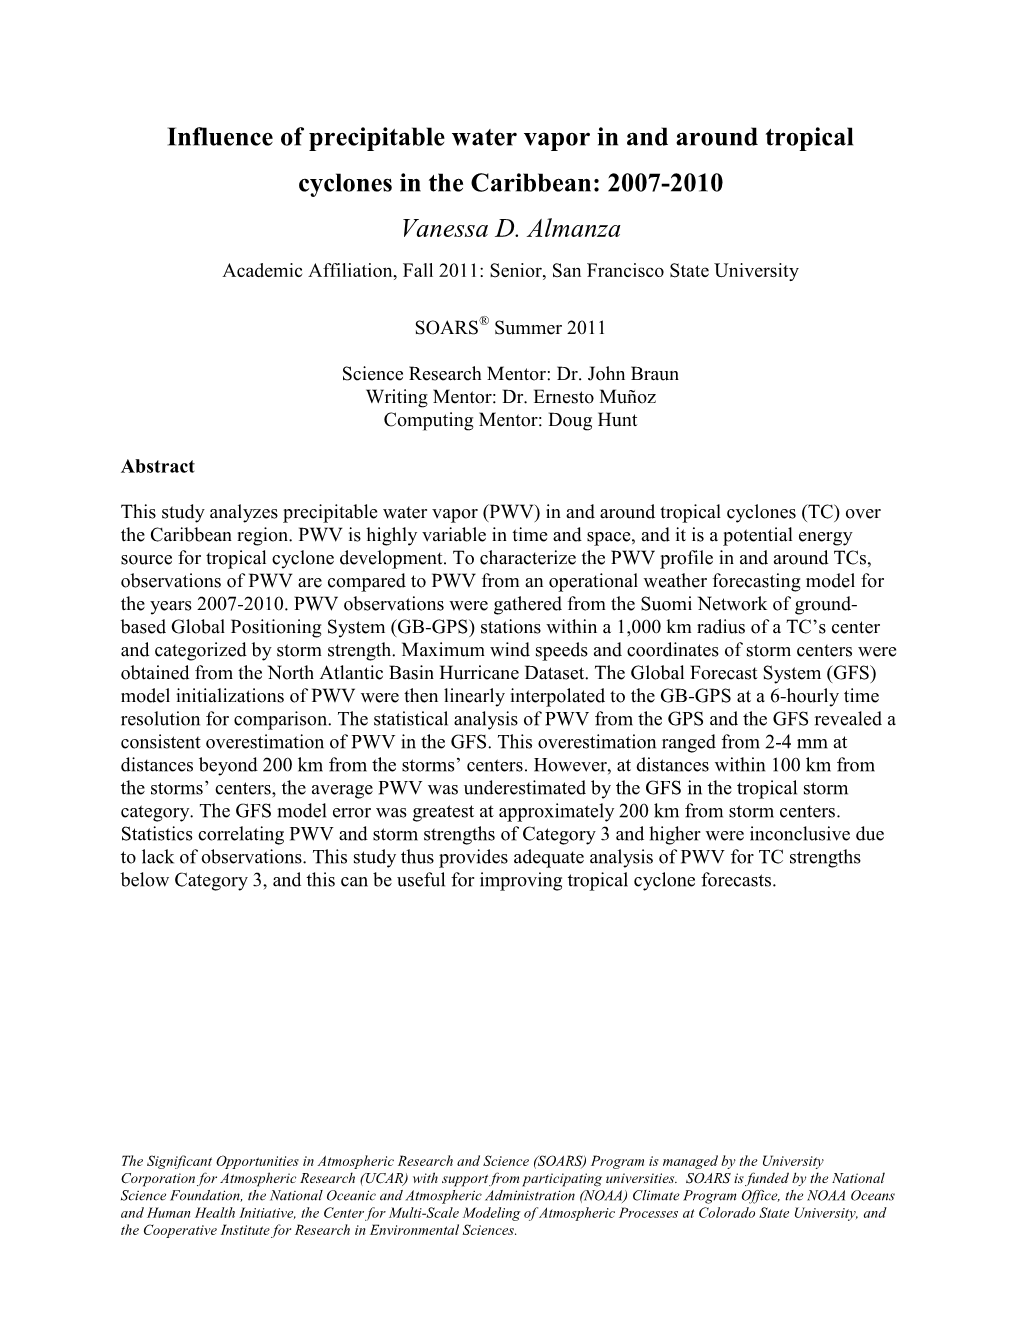 Influence of Precipitable Water Vapor in and Around Tropical Cyclones in the Caribbean: 2007-2010 Vanessa D